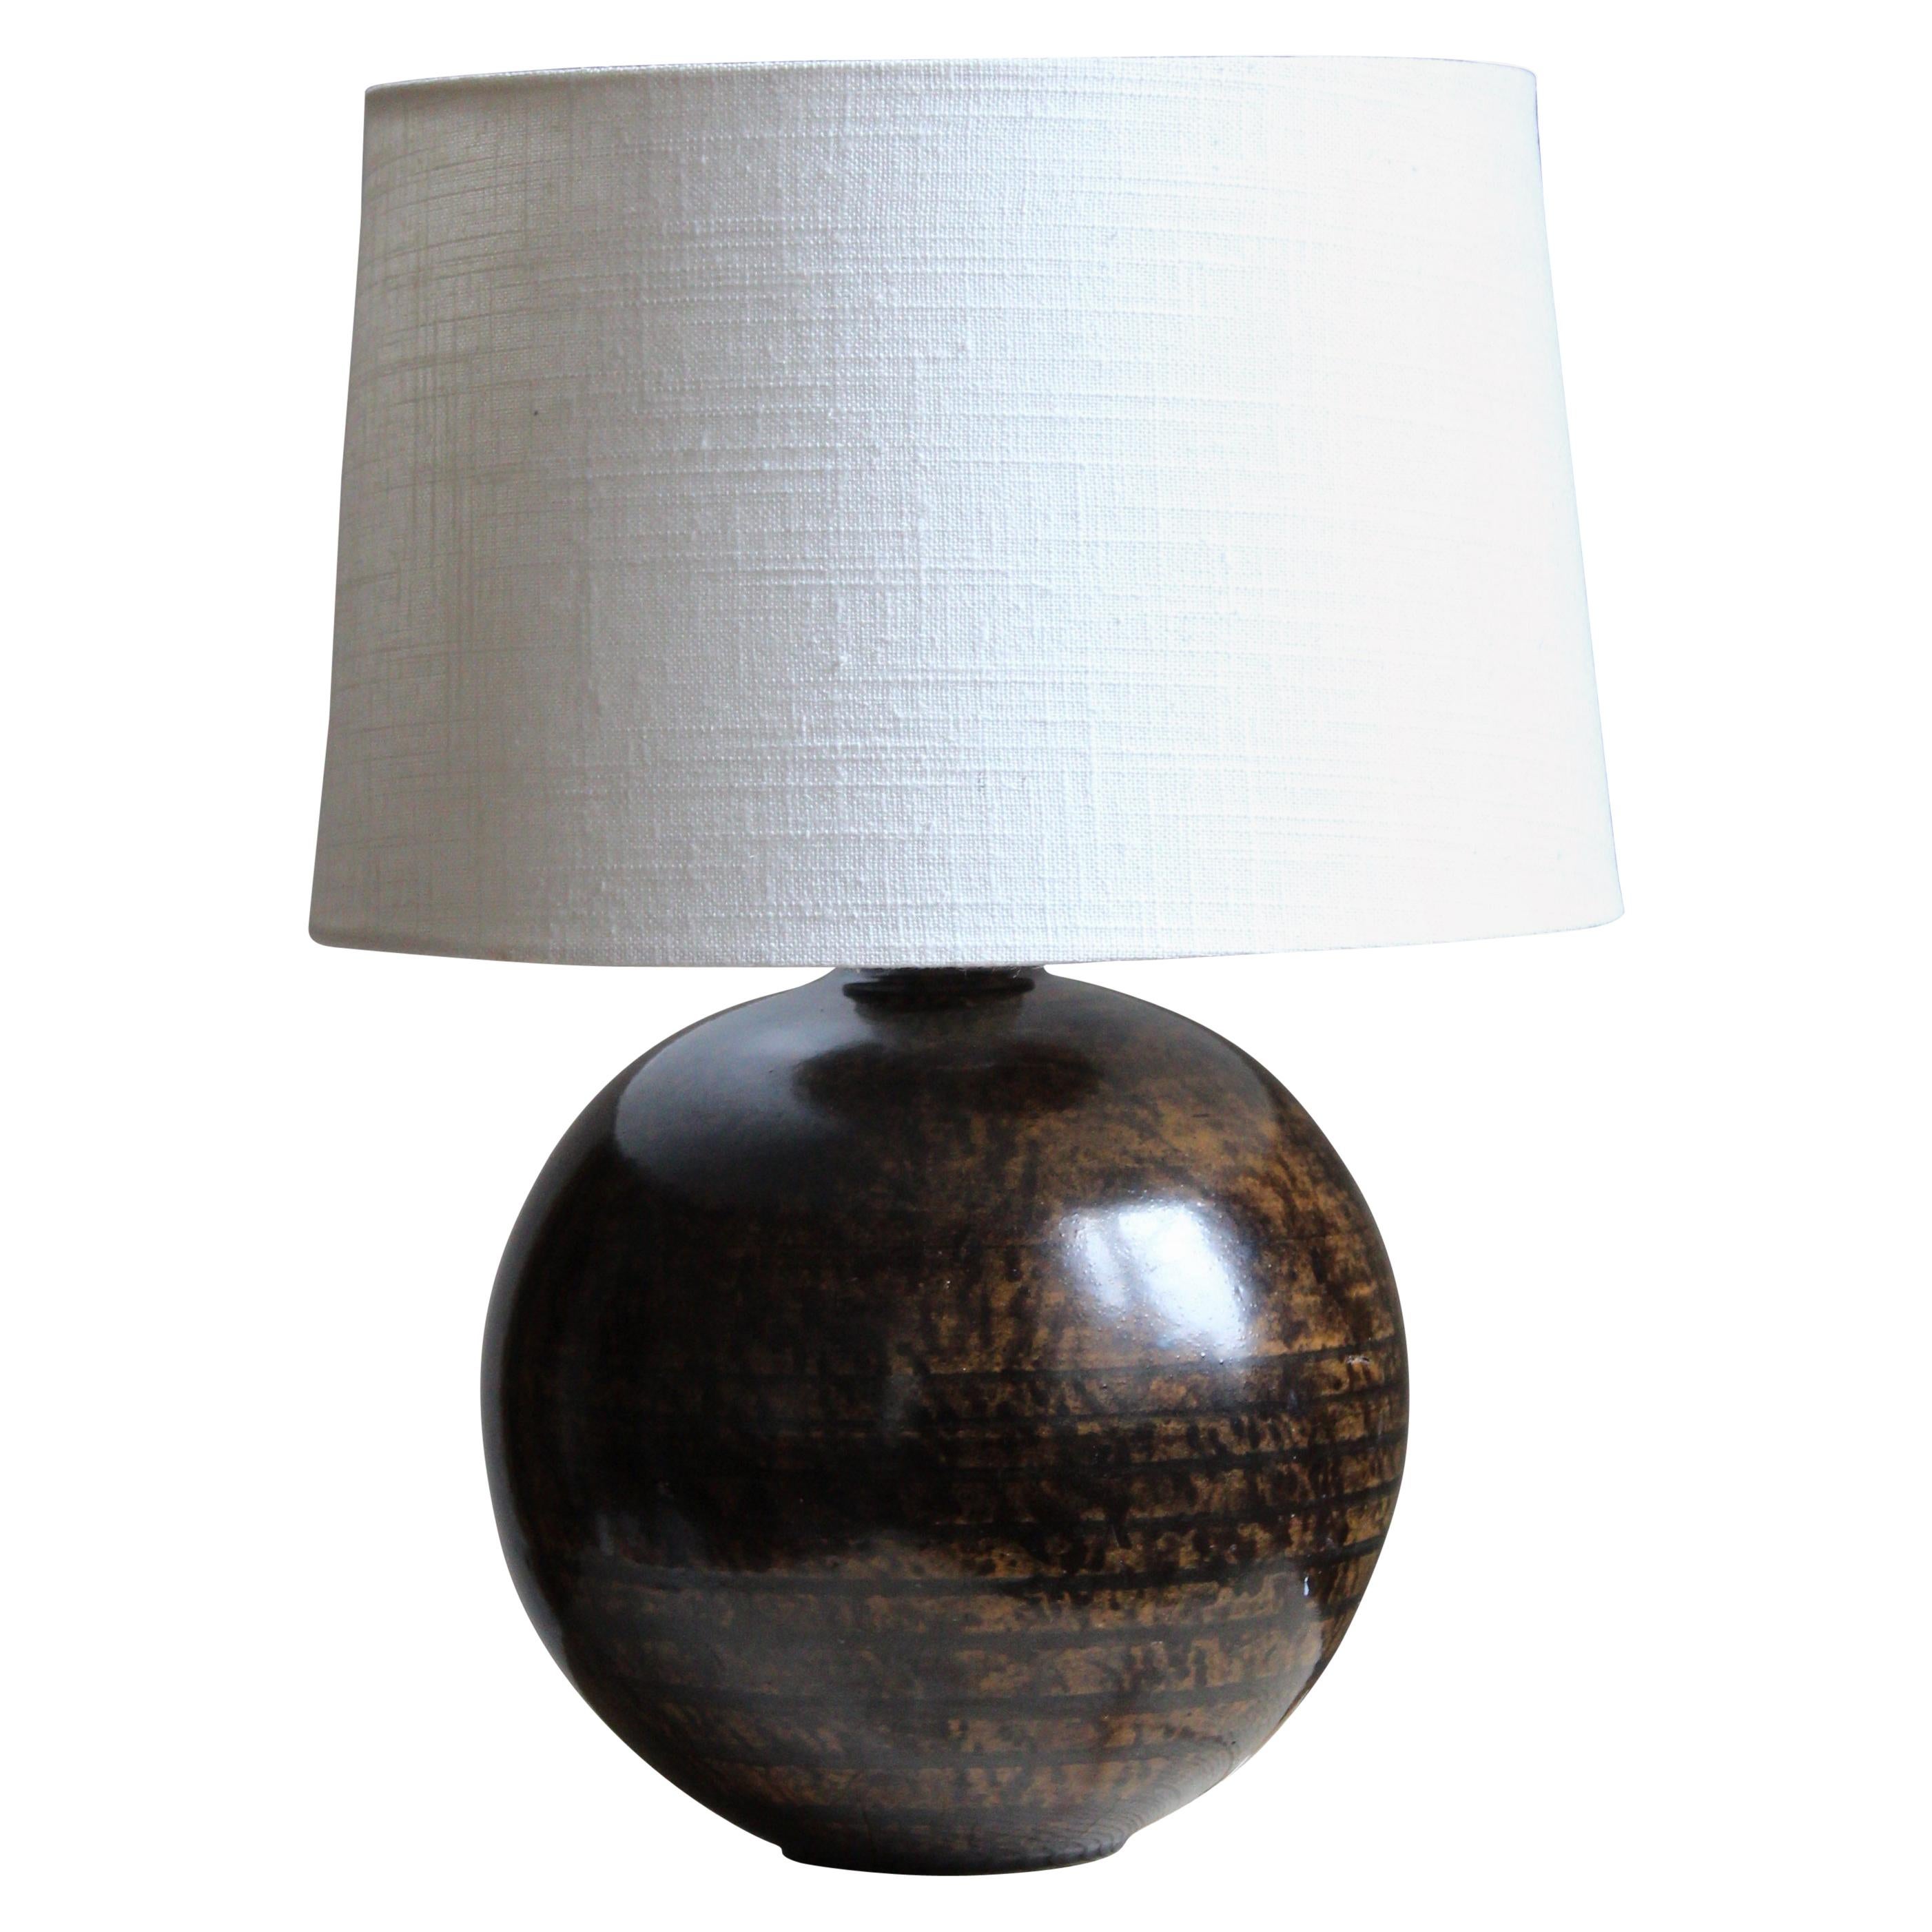 Nittsjö, Table Lamp, Brown Glazed and Hand-Painted Ceramic, Sweden, circa 1930